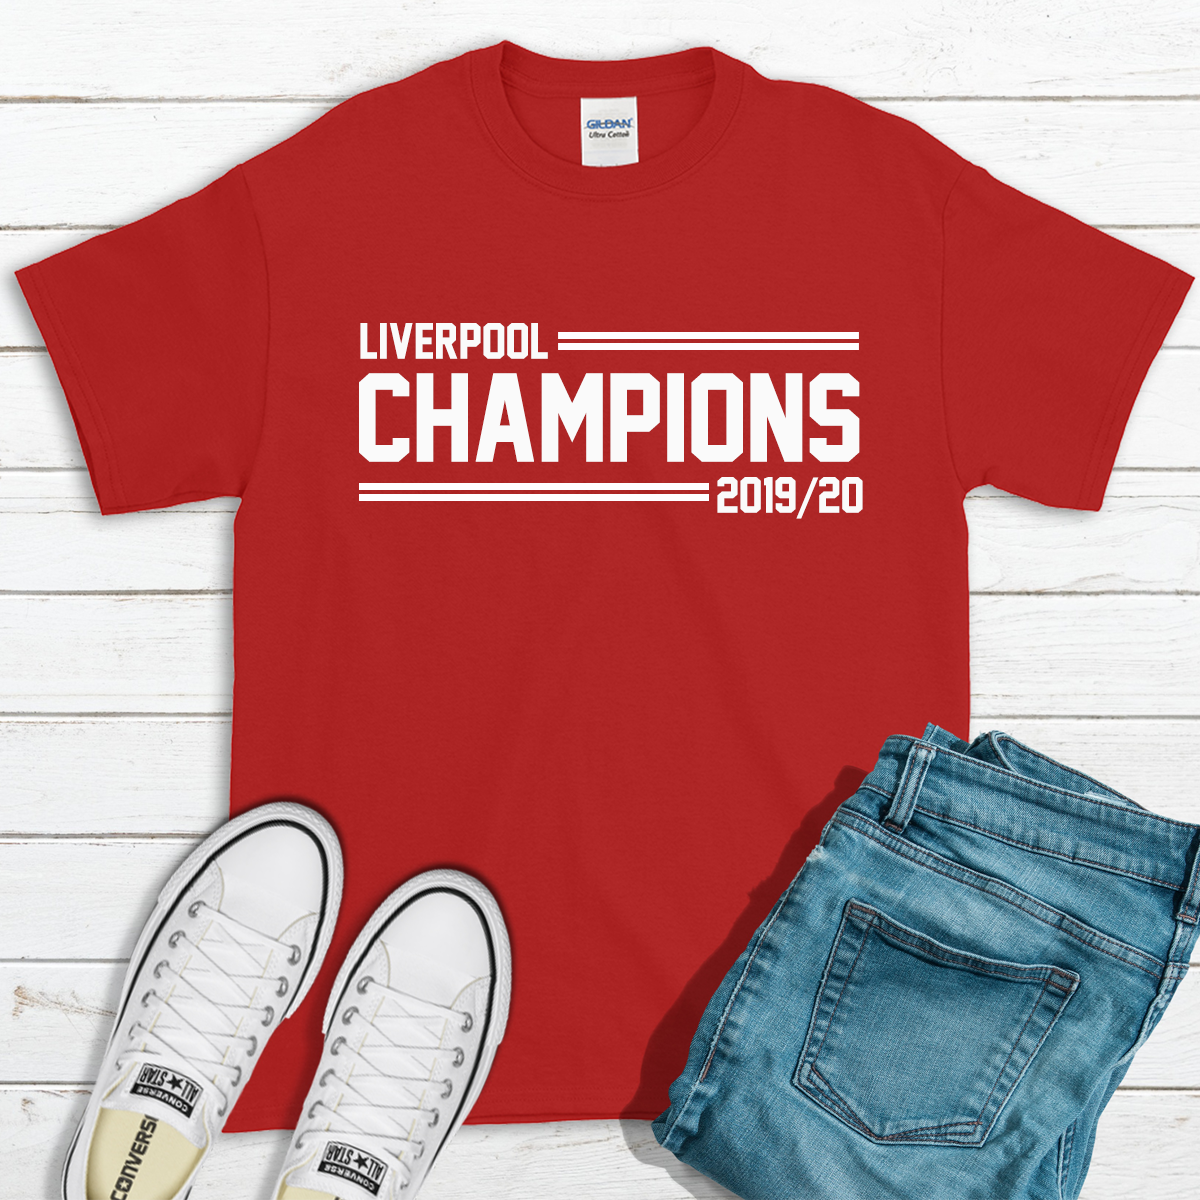 Liverpool Champions 2019-20 Red T-Shirt